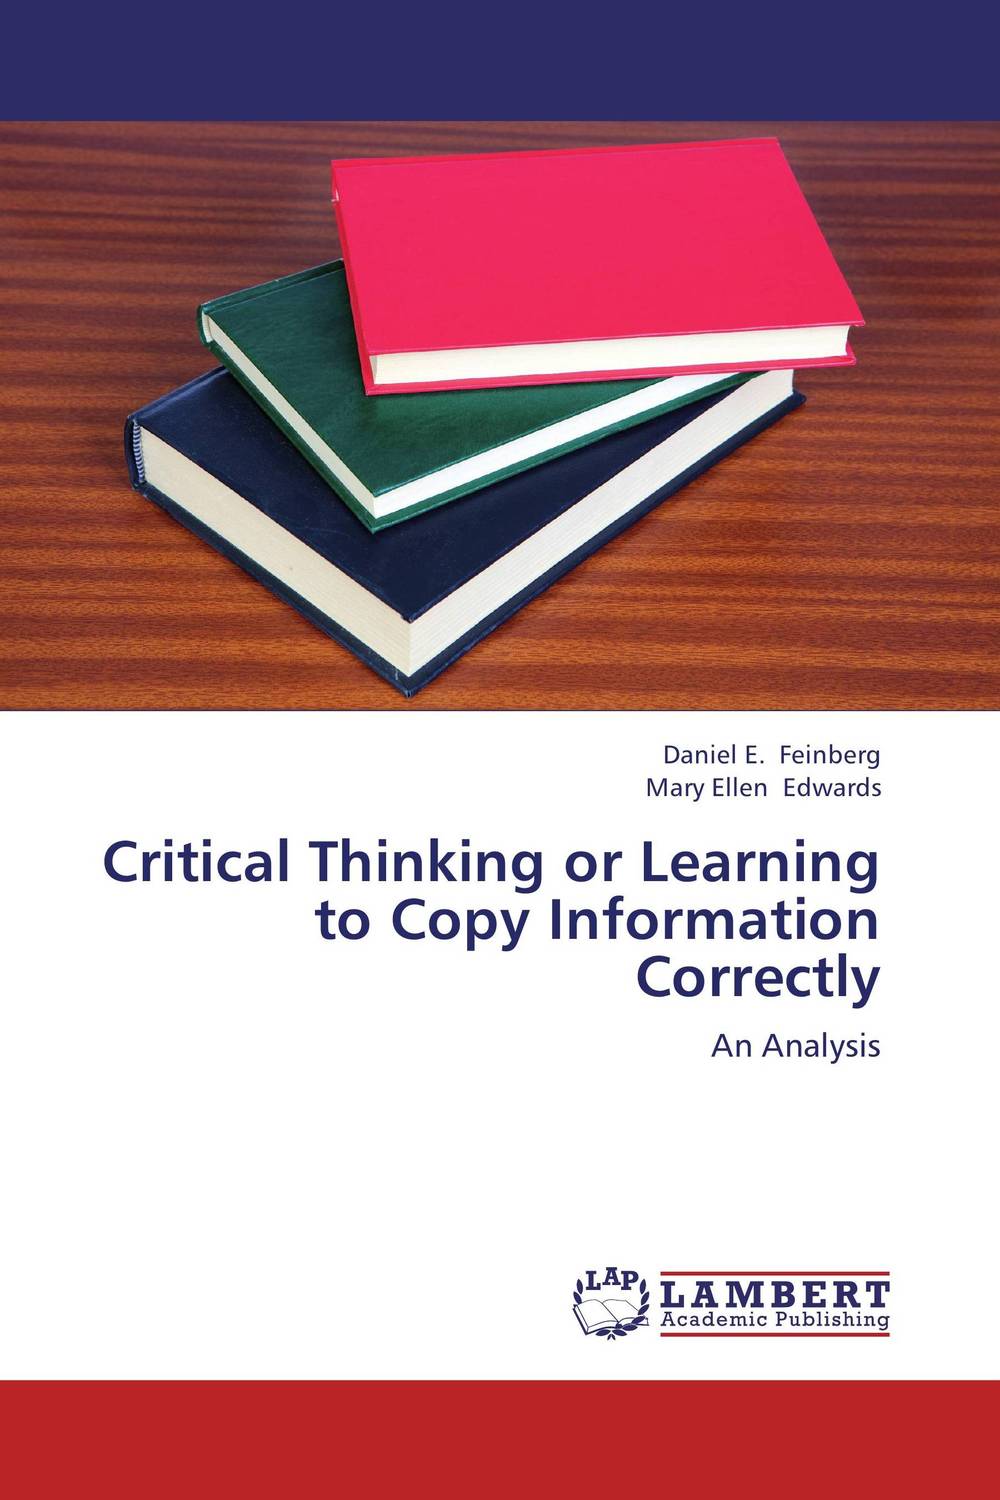 Critical Thinking or Learning to Copy Information Correctly